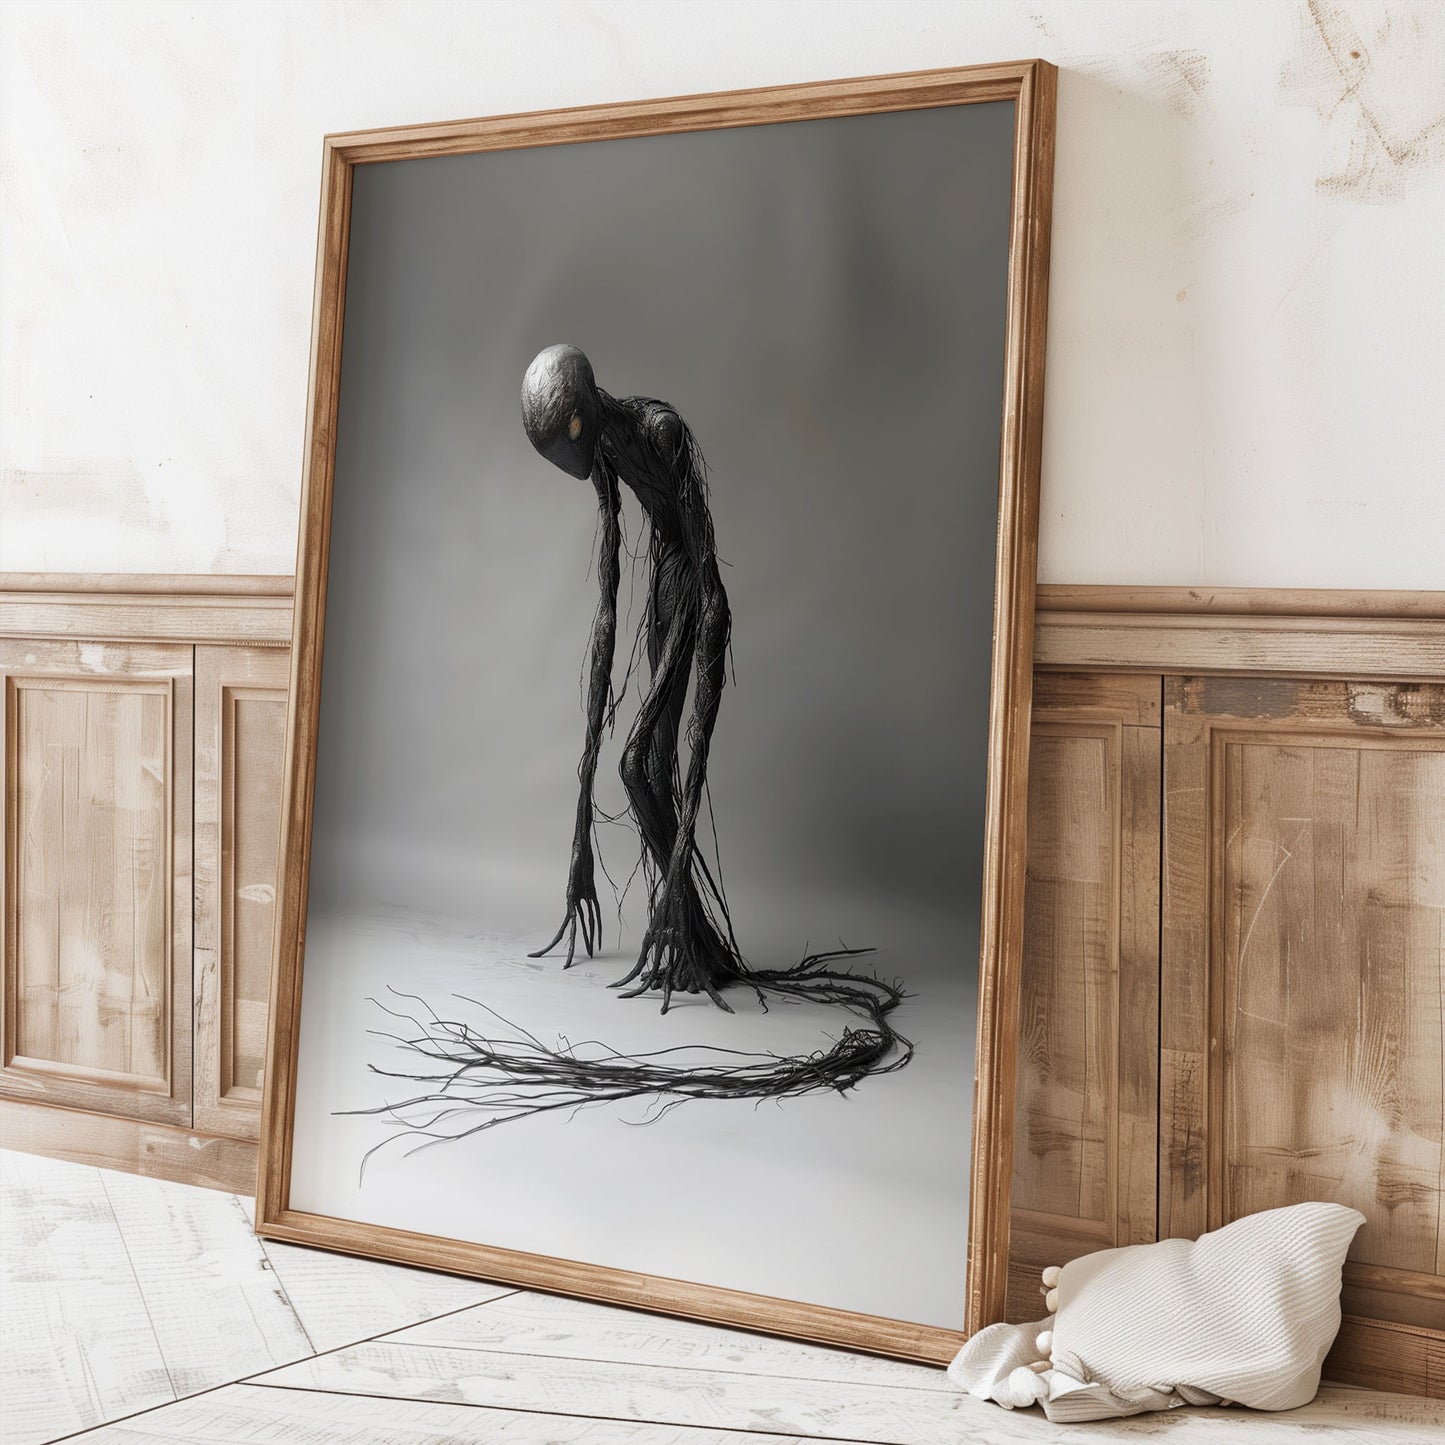 Slender Rope Monster Hunched Over - Creepy Print for Spooky Wall Art